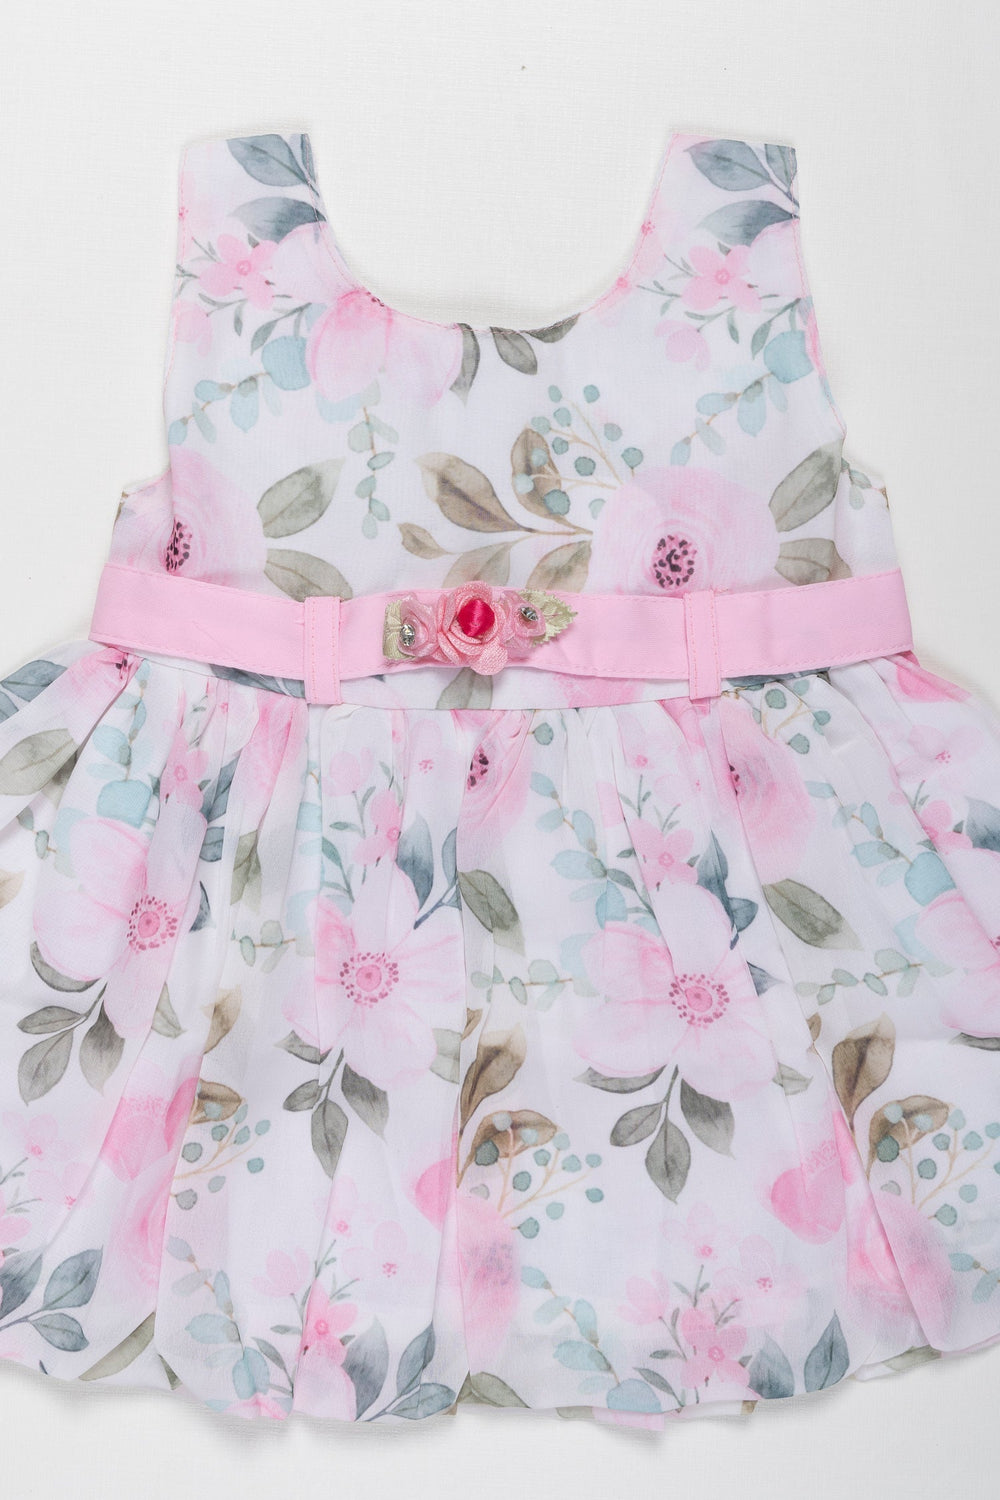 The Nesavu Baby Fancy Frock Blooming Elegance Floral Print Dress for Baby Girls - Pastel Perfection Nesavu Infant Girls Pastel Floral Cotton Frock | Chic Baby Party Wear | The Nesavu